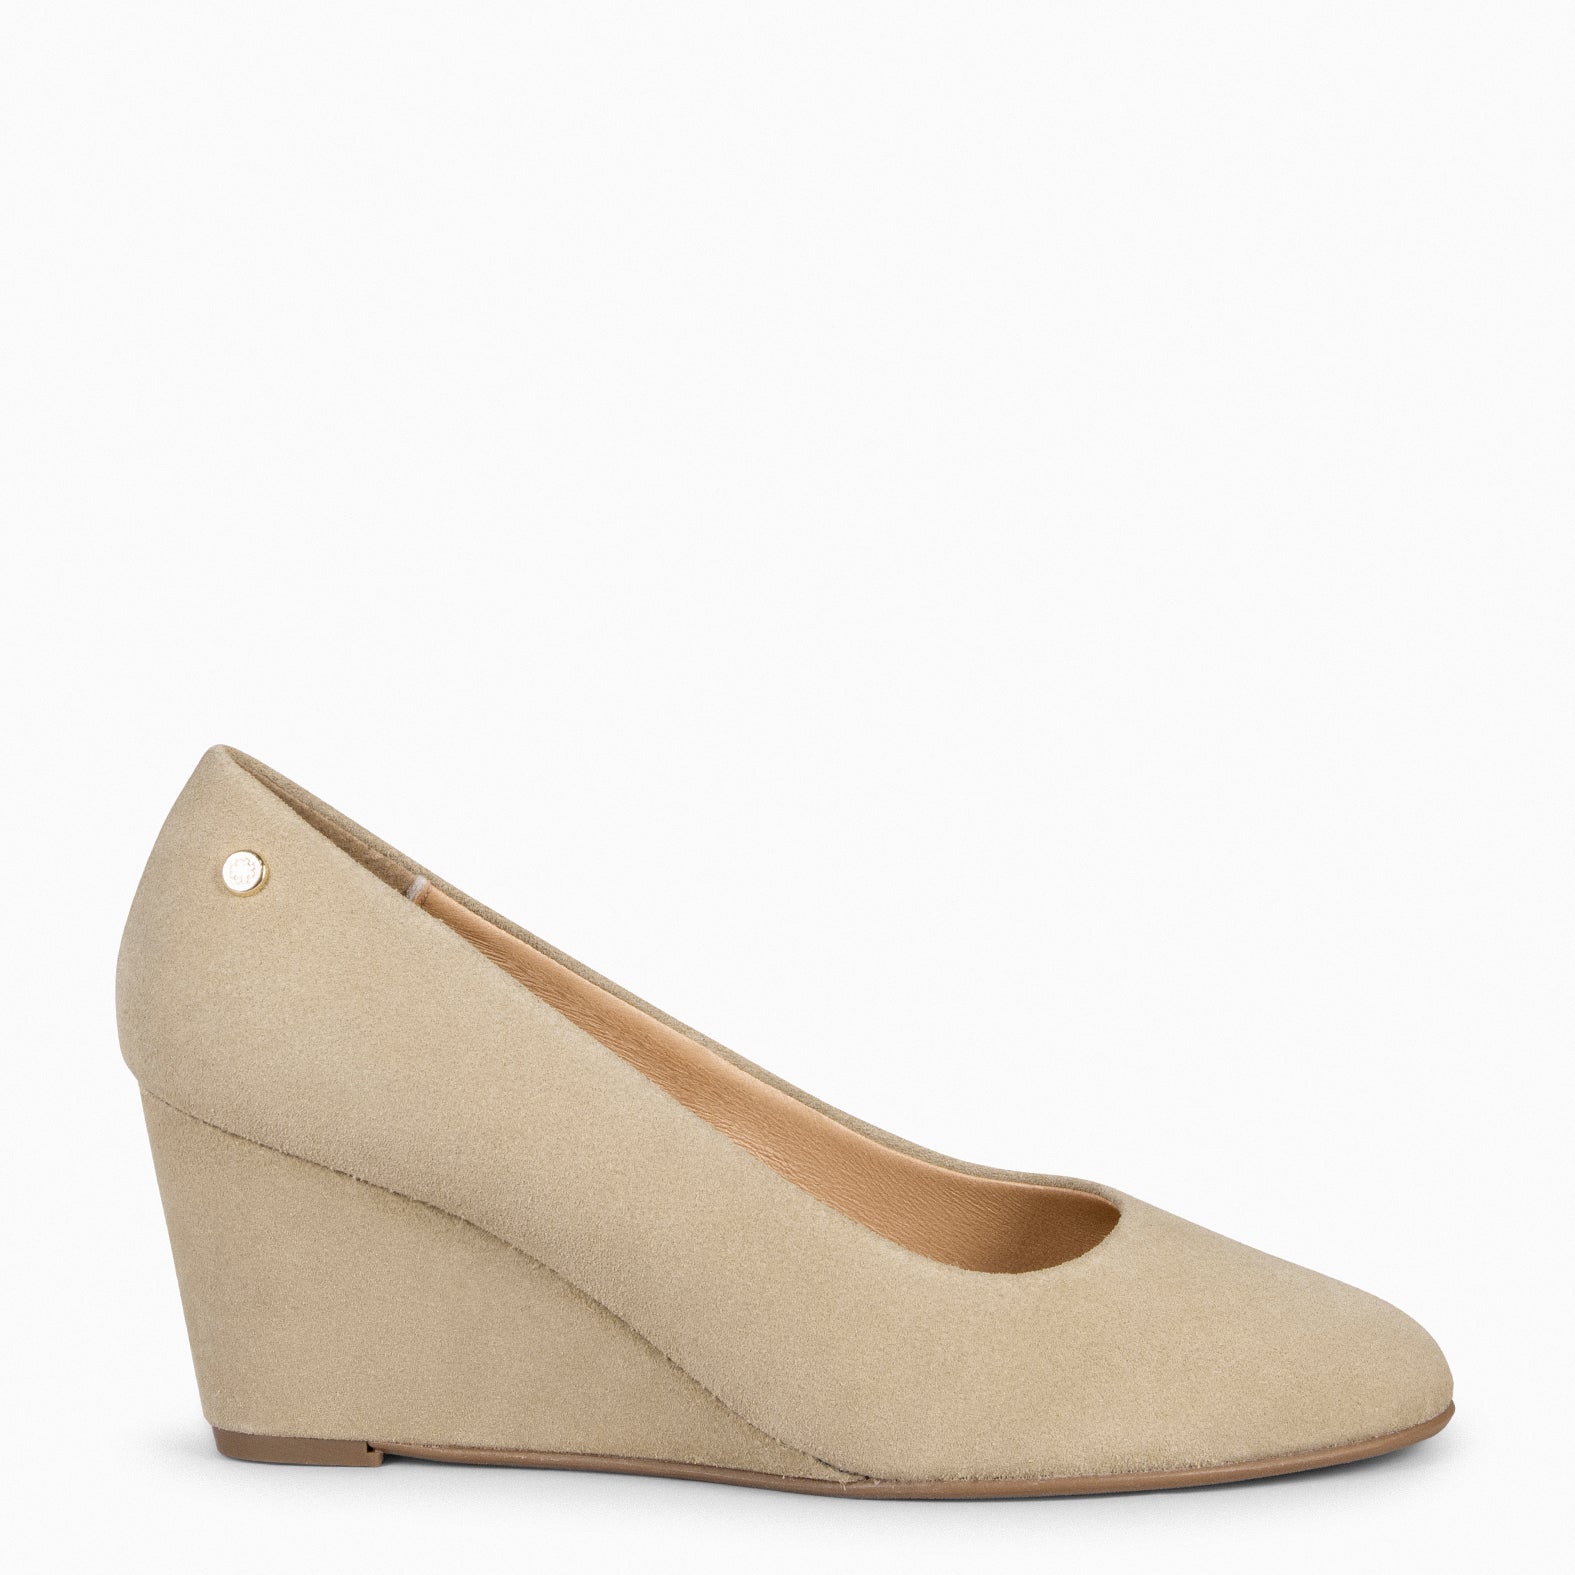 WEDGE ROUND – SAND Shoes with wedge 